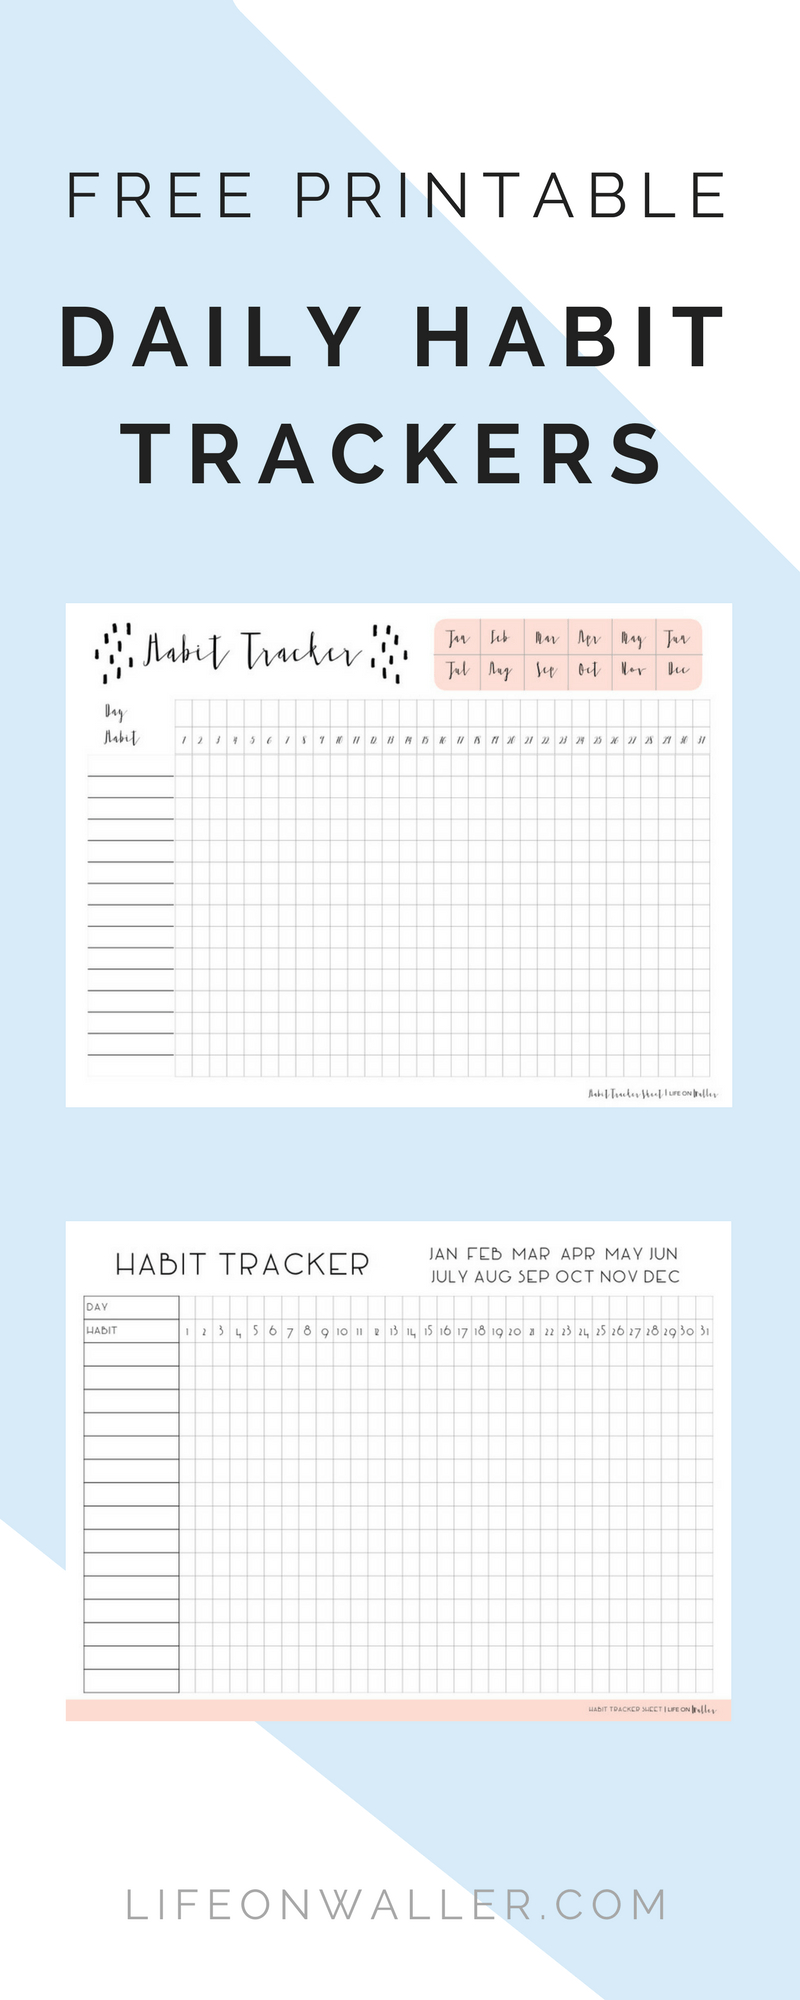 Daily Habit Tracker Free Printables | Best Of: Cassiescroggins - Habit Tracker Free Printable